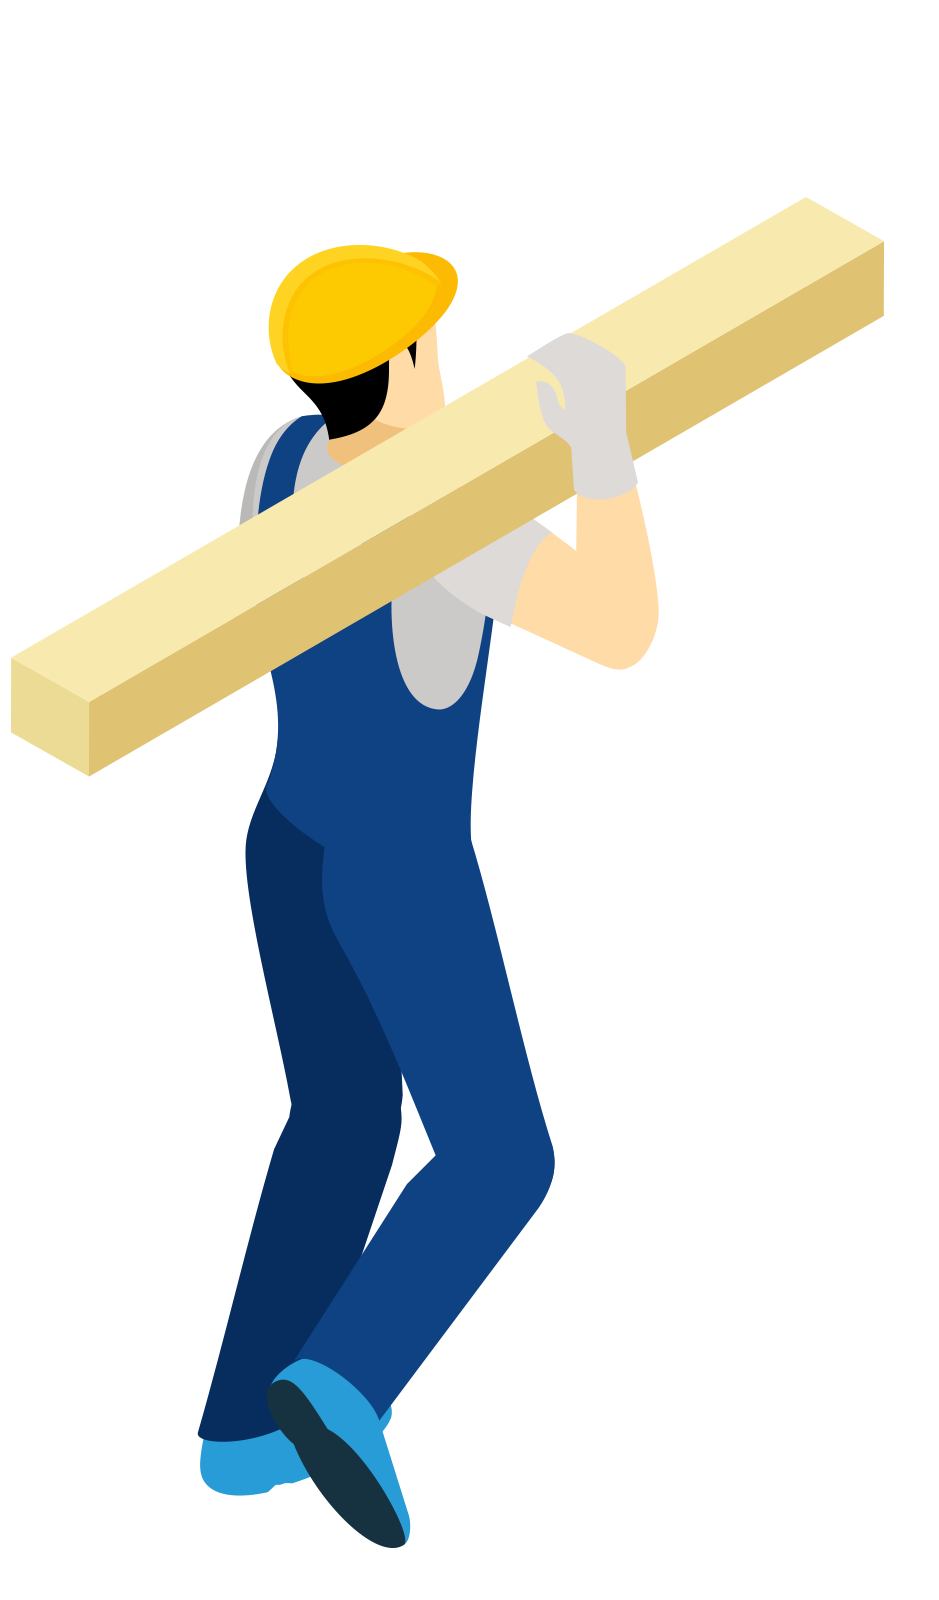 tool clipart construction worker